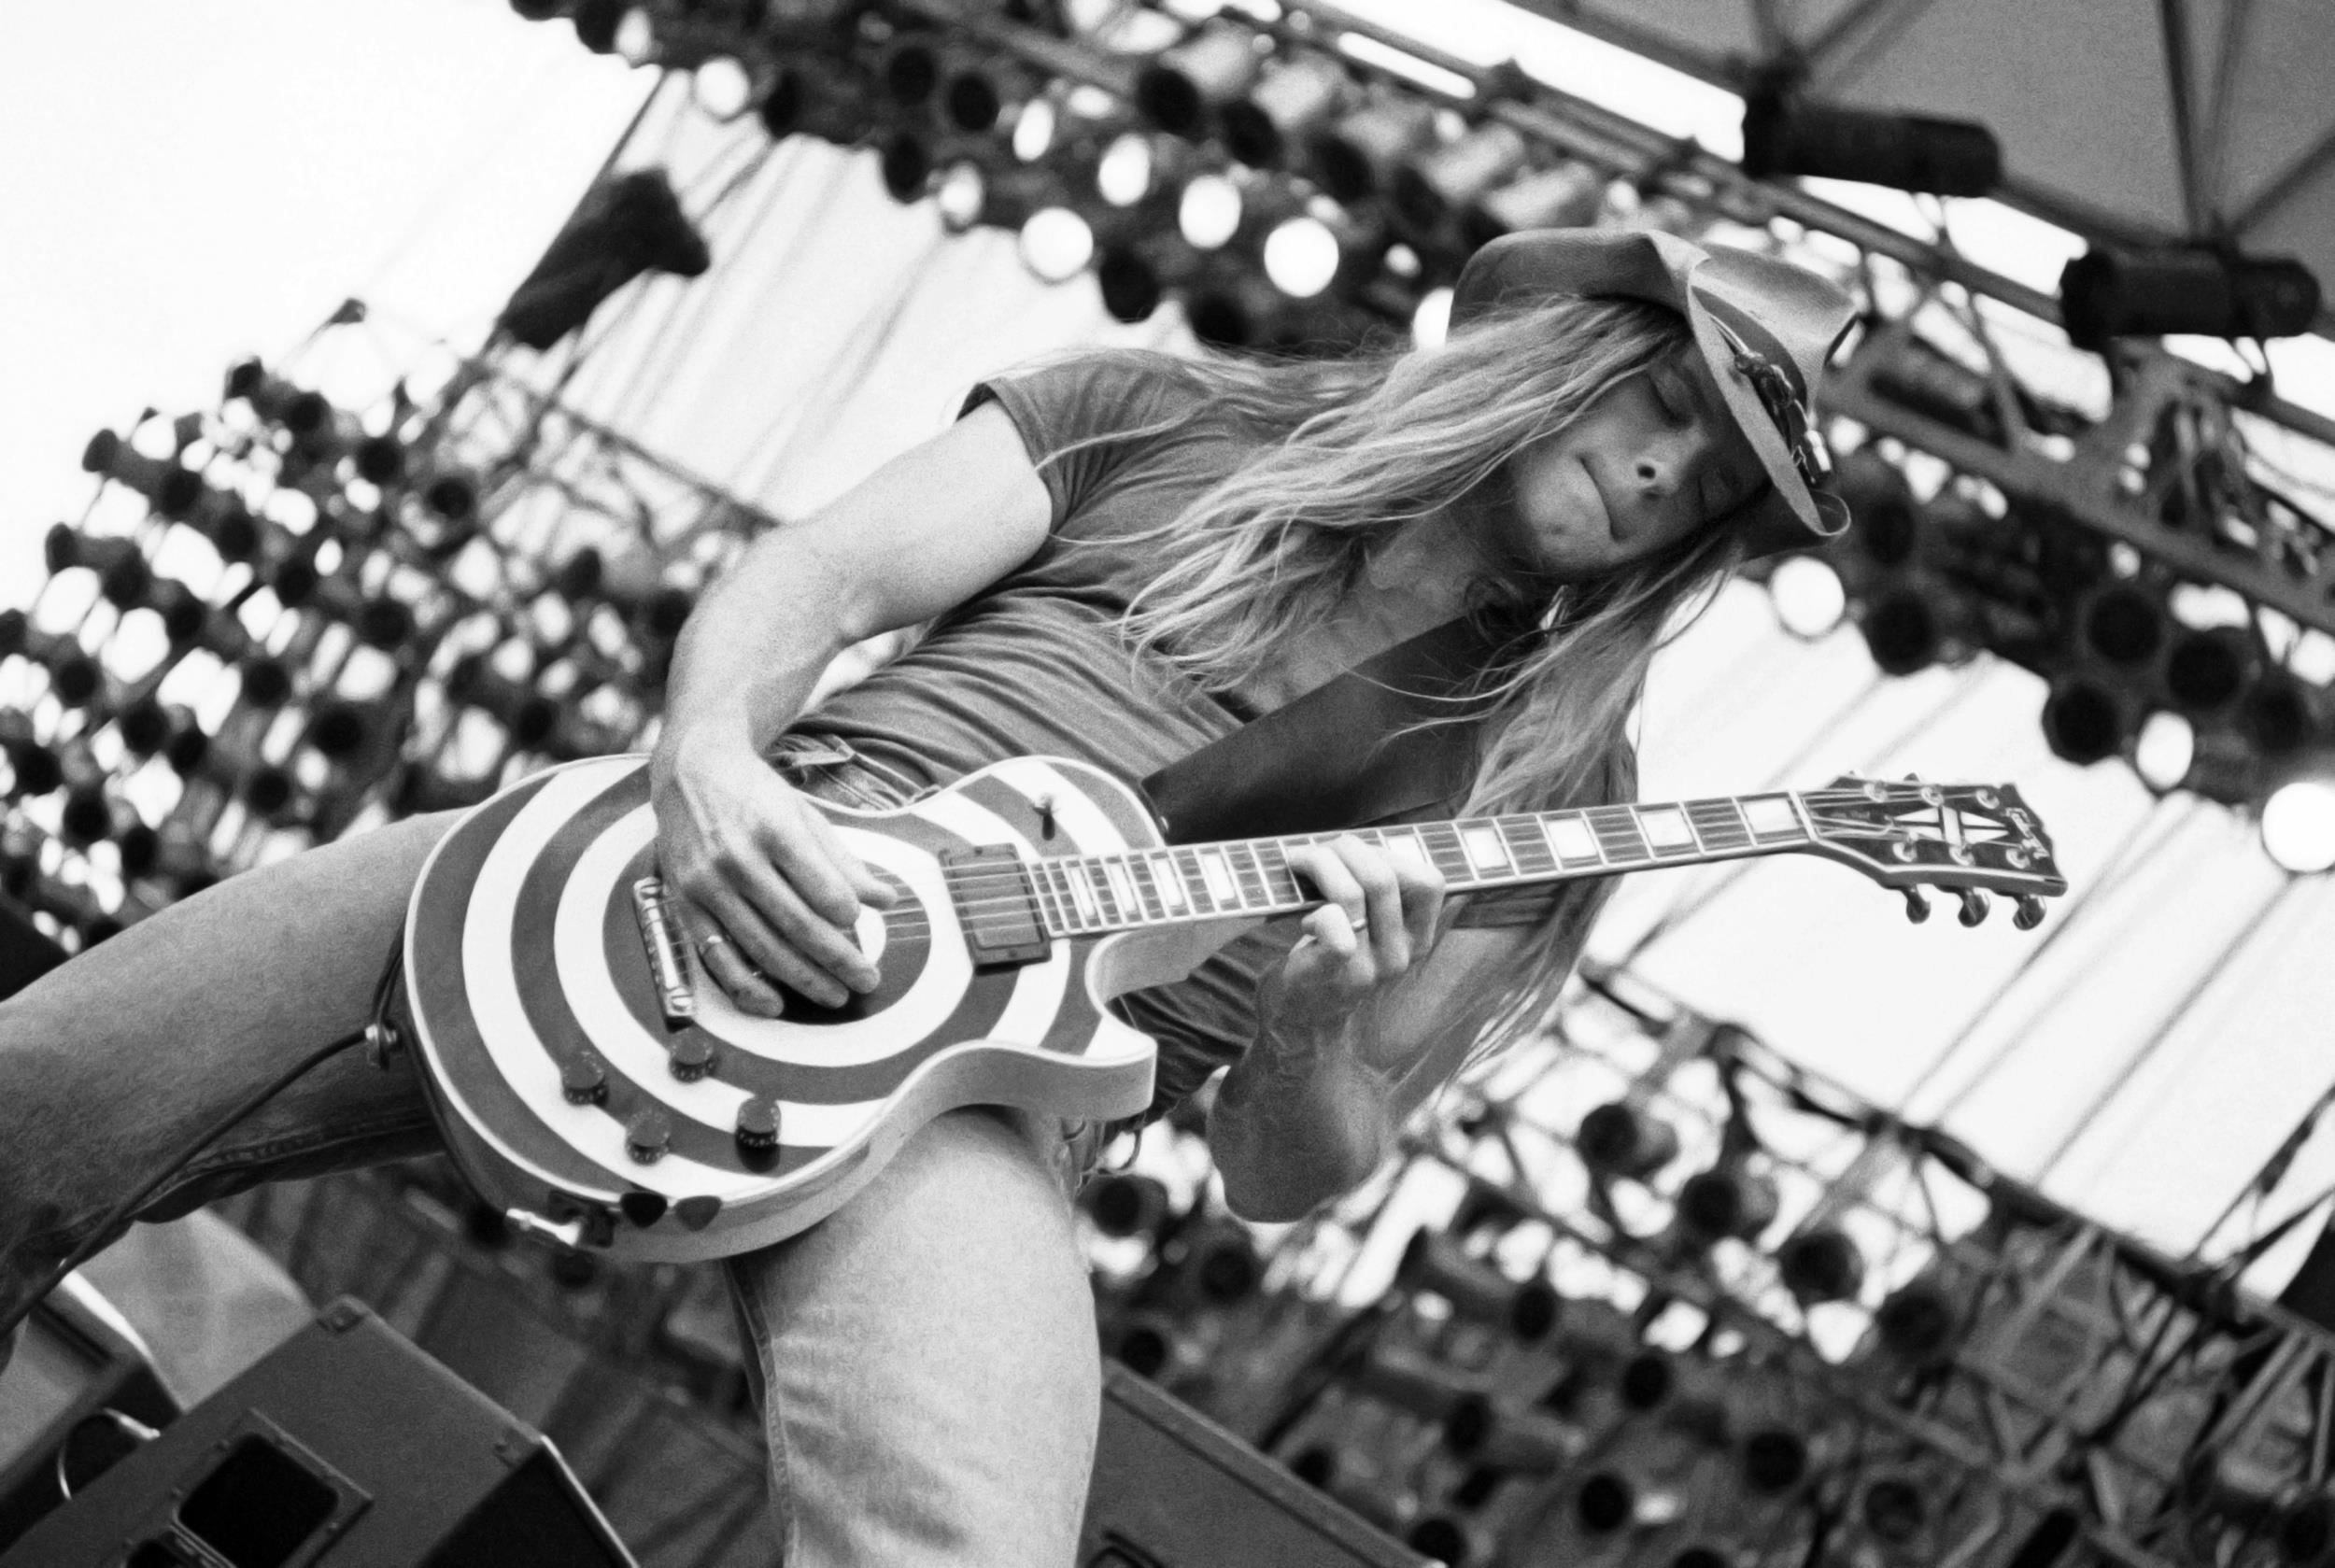 <p>What do you do when you're the sideman for arguably the world's biggest metal singer and he "retires"? Why, you turn your thoughts to southern swamp rock, of course! Zakk Wylde's sudden shift to Allman Brothers style jams in 1994 was a mild shock to fans, but the fans found they liked his new direction. The trio was rounded out by bassist James LoMenzo (White Lion) and drummer Brian Tichy. However, by October 1994, Pride & Glory were finished. But fear not — Ozzy Osbourne un-retired in 1995, and Wylde rejoined him in 2001.</p><p><a href='https://www.msn.com/en-us/community/channel/vid-cj9pqbr0vn9in2b6ddcd8sfgpfq6x6utp44fssrv6mc2gtybw0us'>Follow us on MSN to see more of our exclusive entertainment content.</a></p>